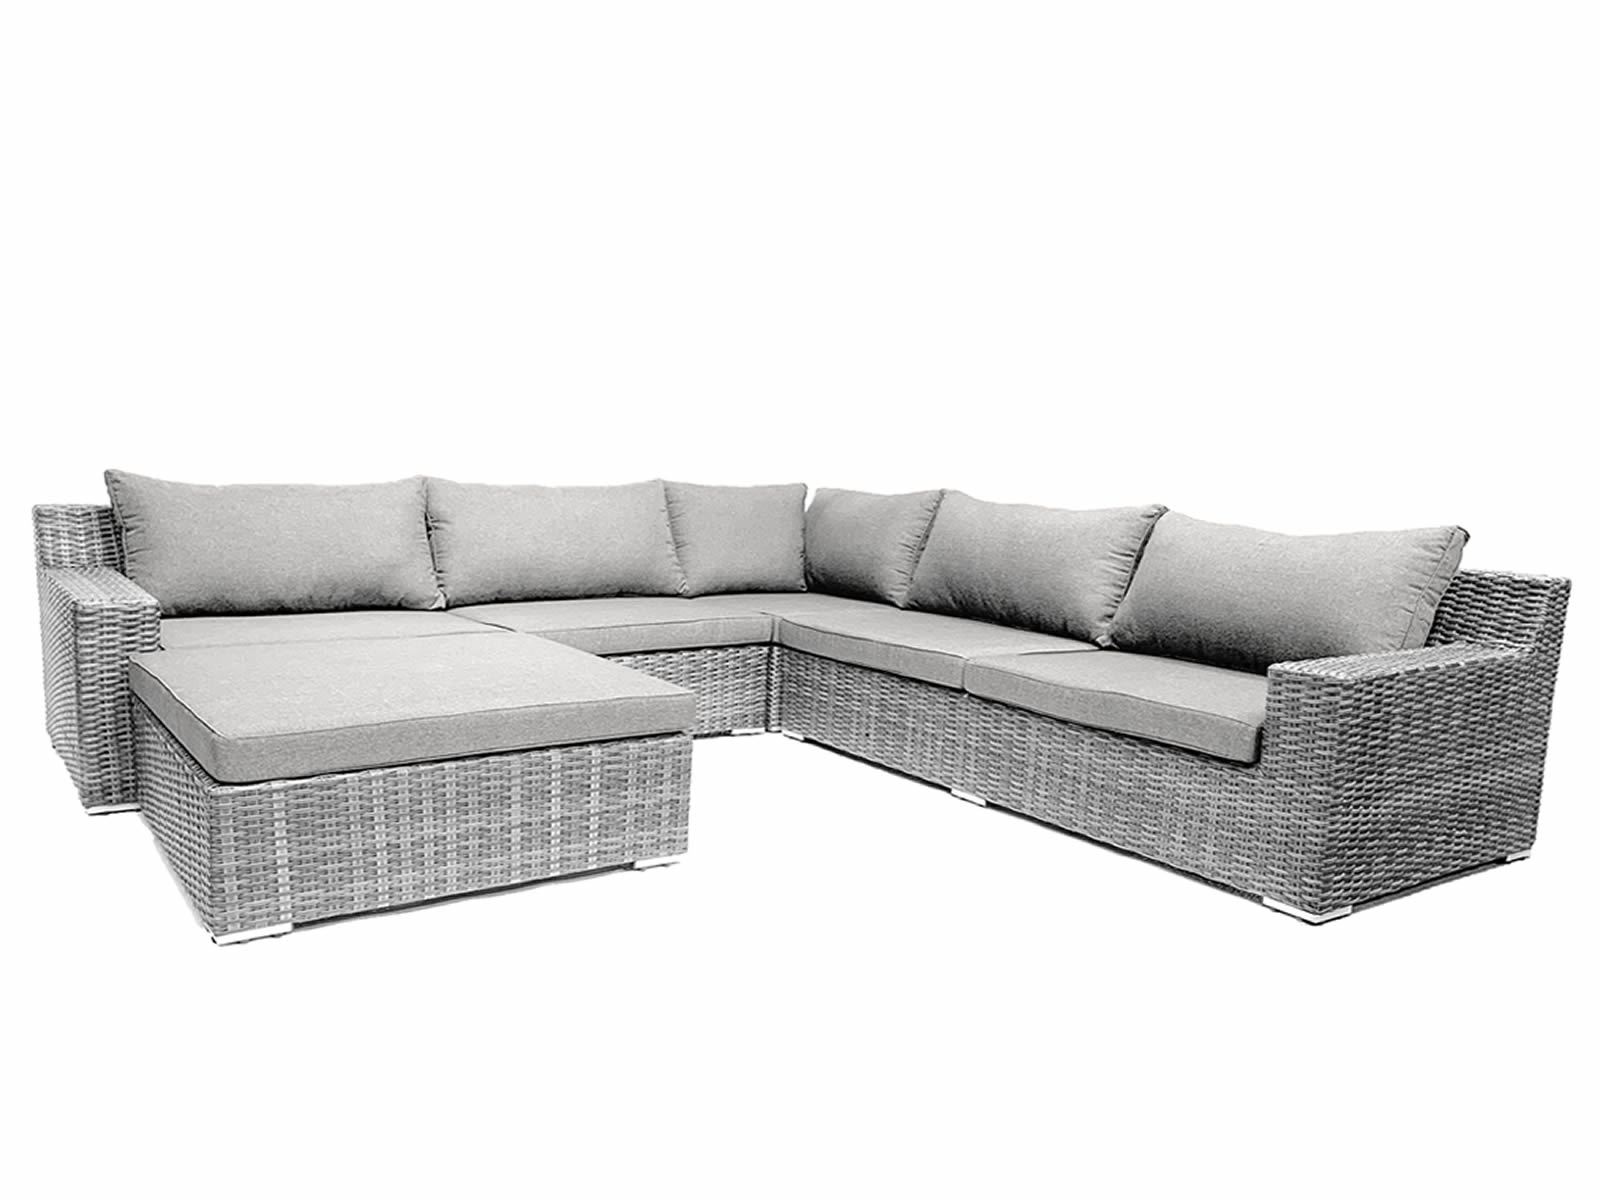 set - lounge Garden beige 7-person | cushions Blended Gray with Garden Yellow Webshop Colorado Furniture |